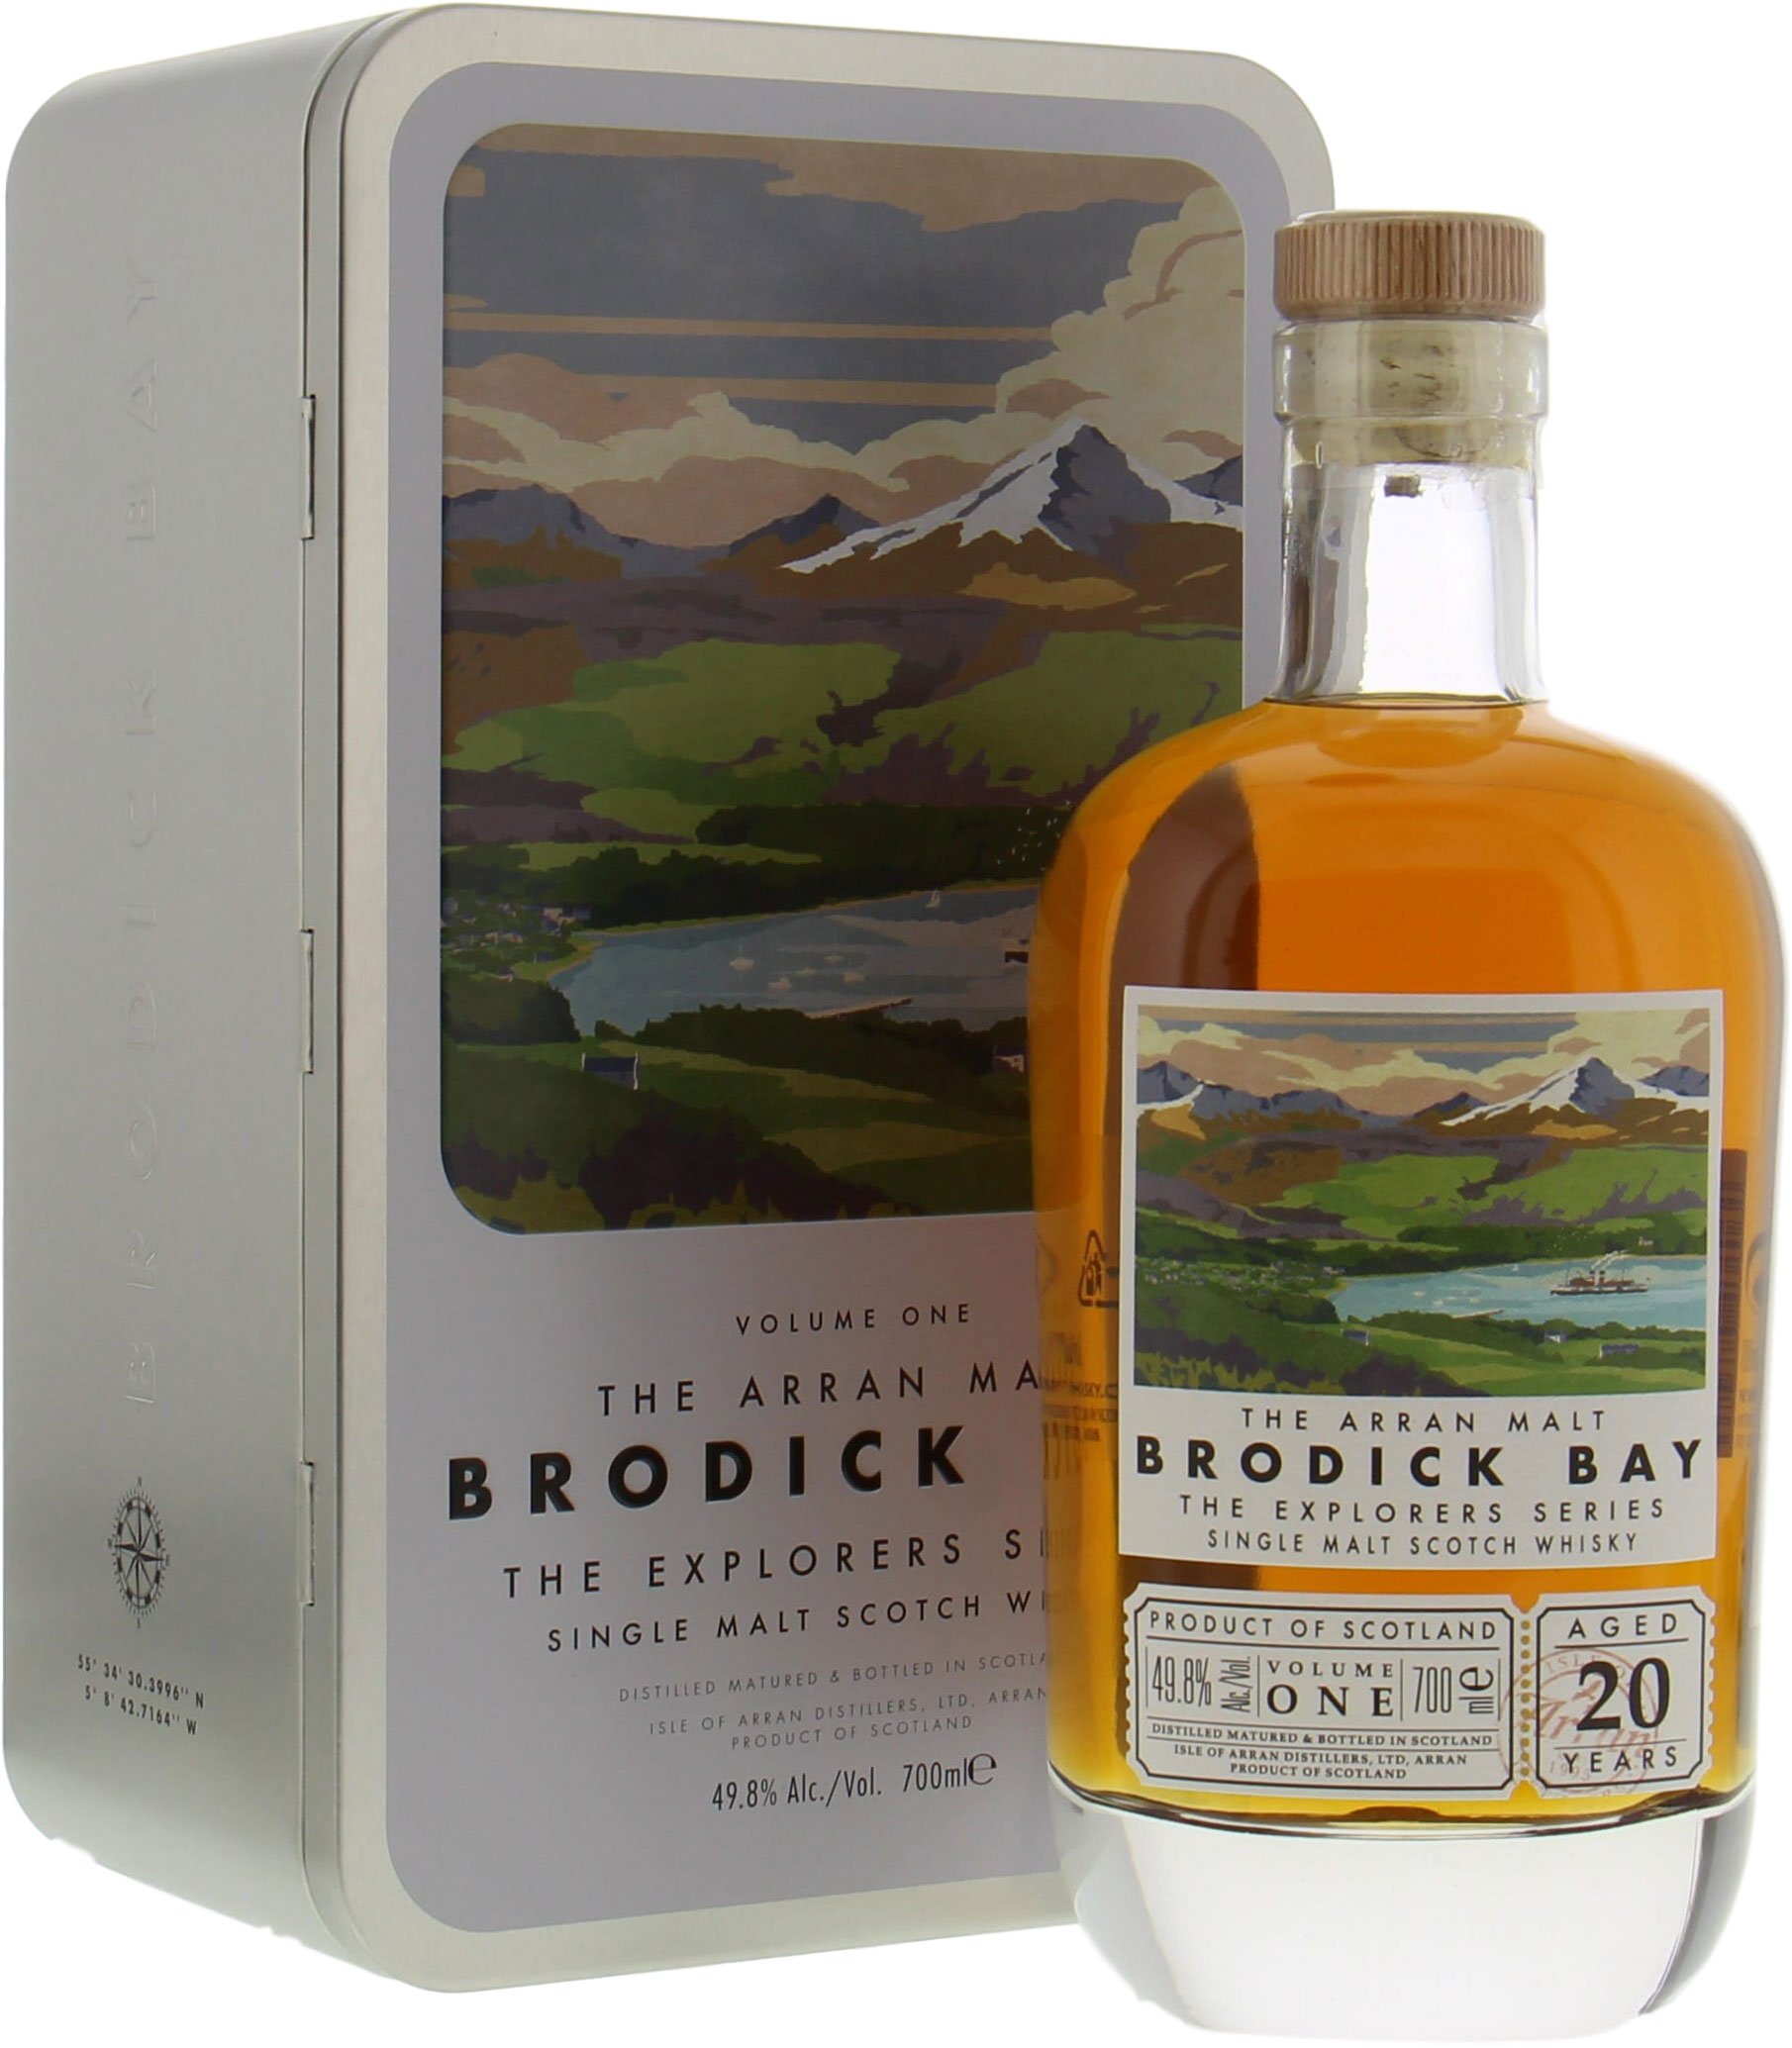 Arran - The Explorer Series Brodick Bay 20 Years Old 49.8% NV